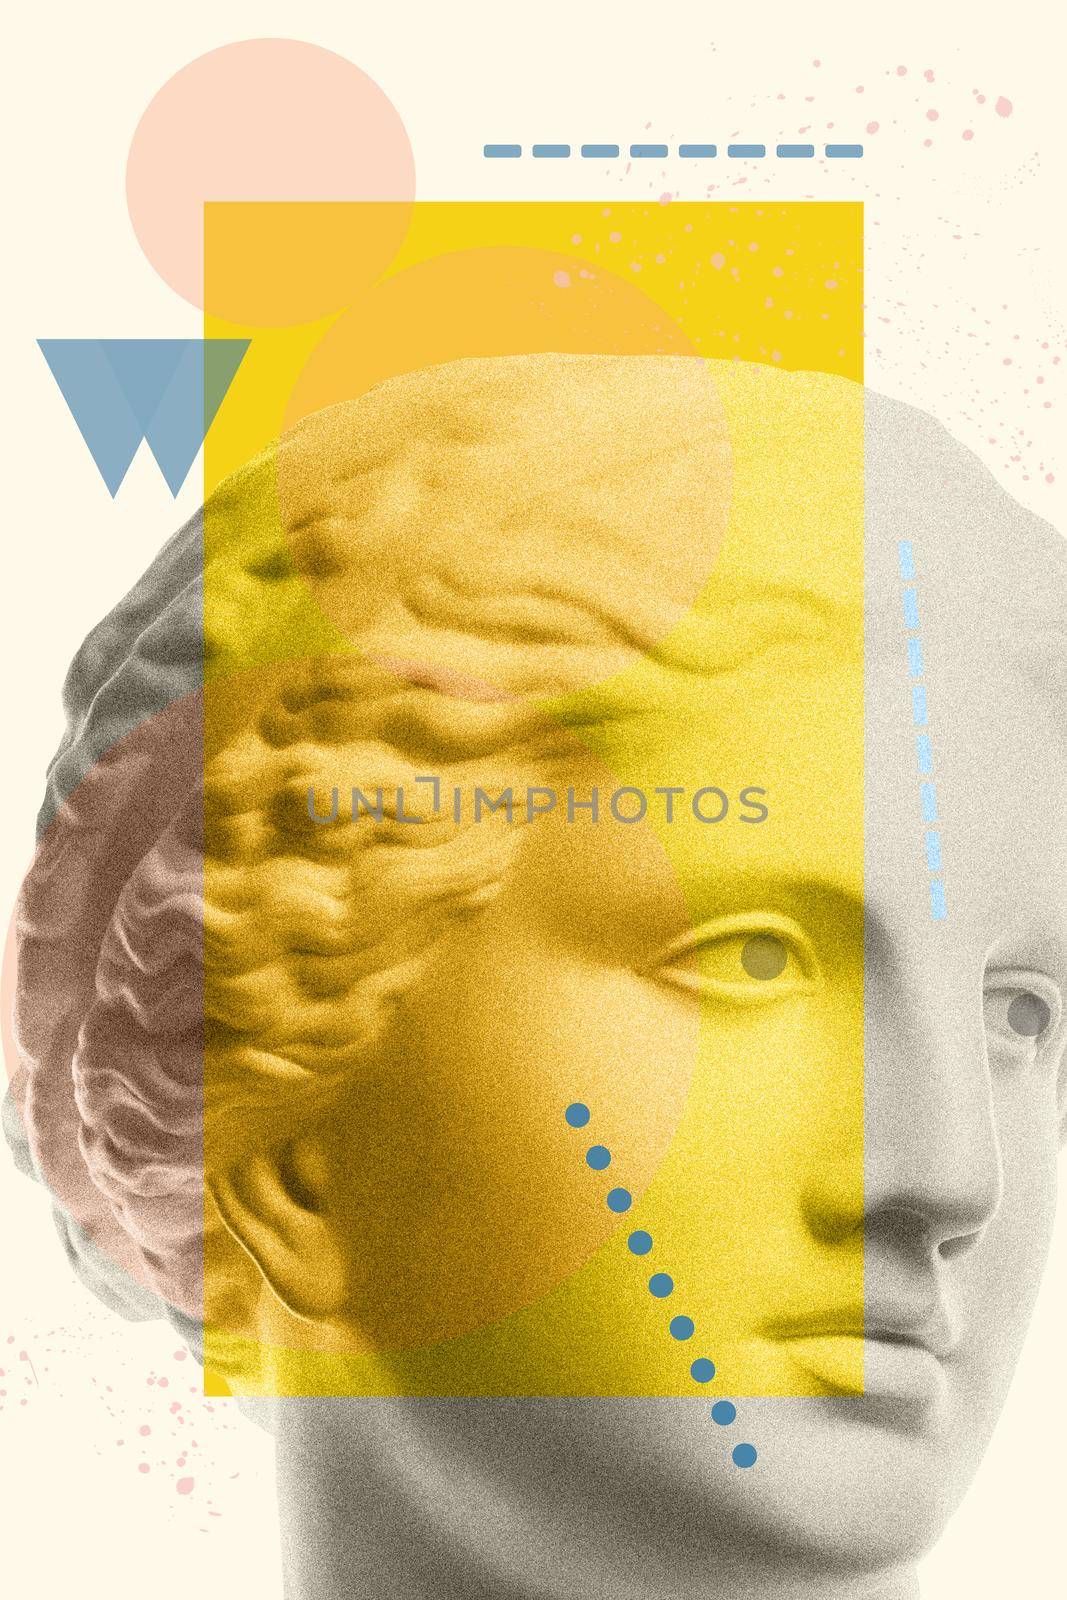 Fashion art collage with plaster antique sculpture of Venus face in a pop art style. Creative vogue concept image in contemporary surrealism style. Beauty, fashion and health theme. Zine culture. by bashta